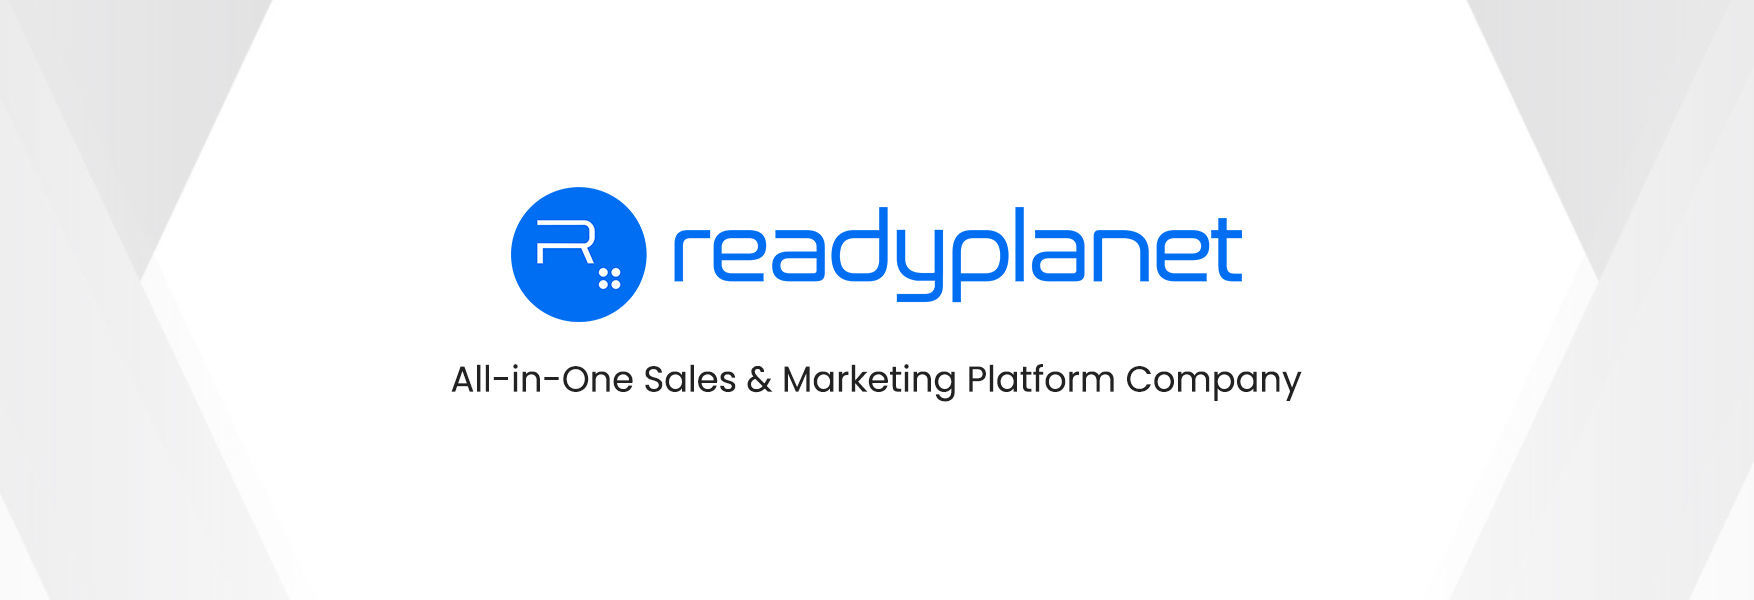 Readyplanet All-in-One Sales & Marketing Platform Company